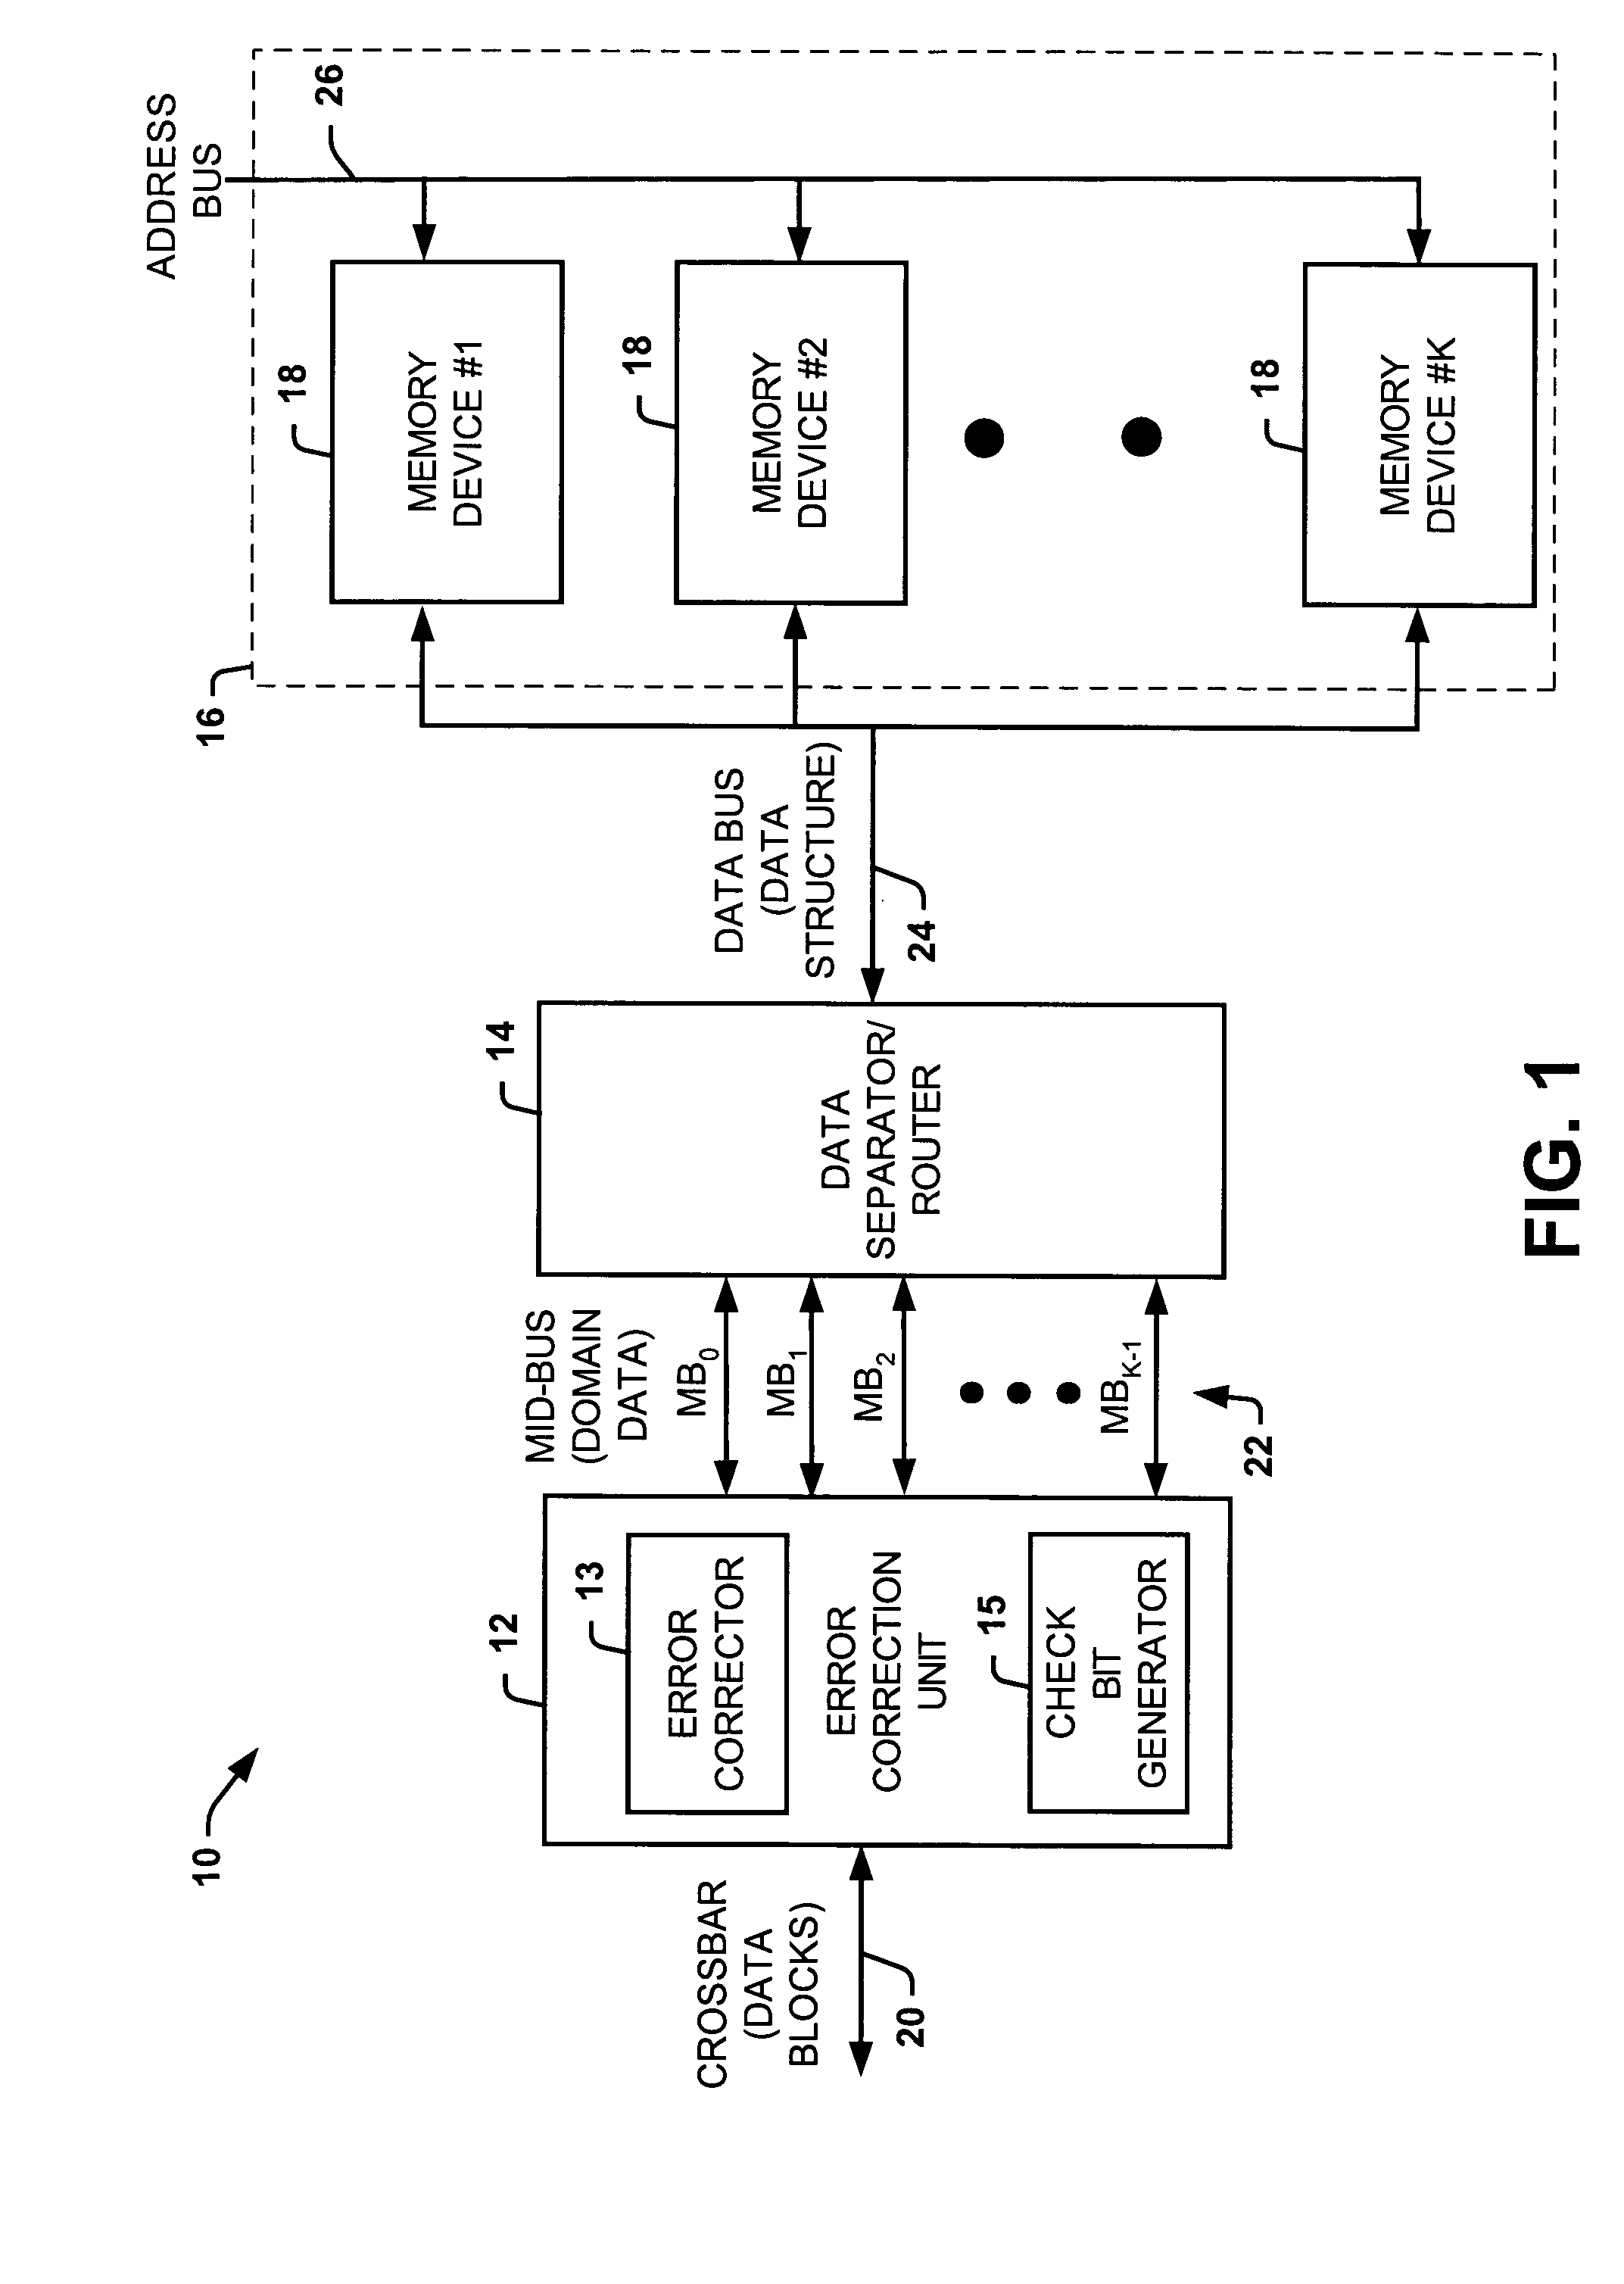 Systems and methods of routing data to facilitate error correction